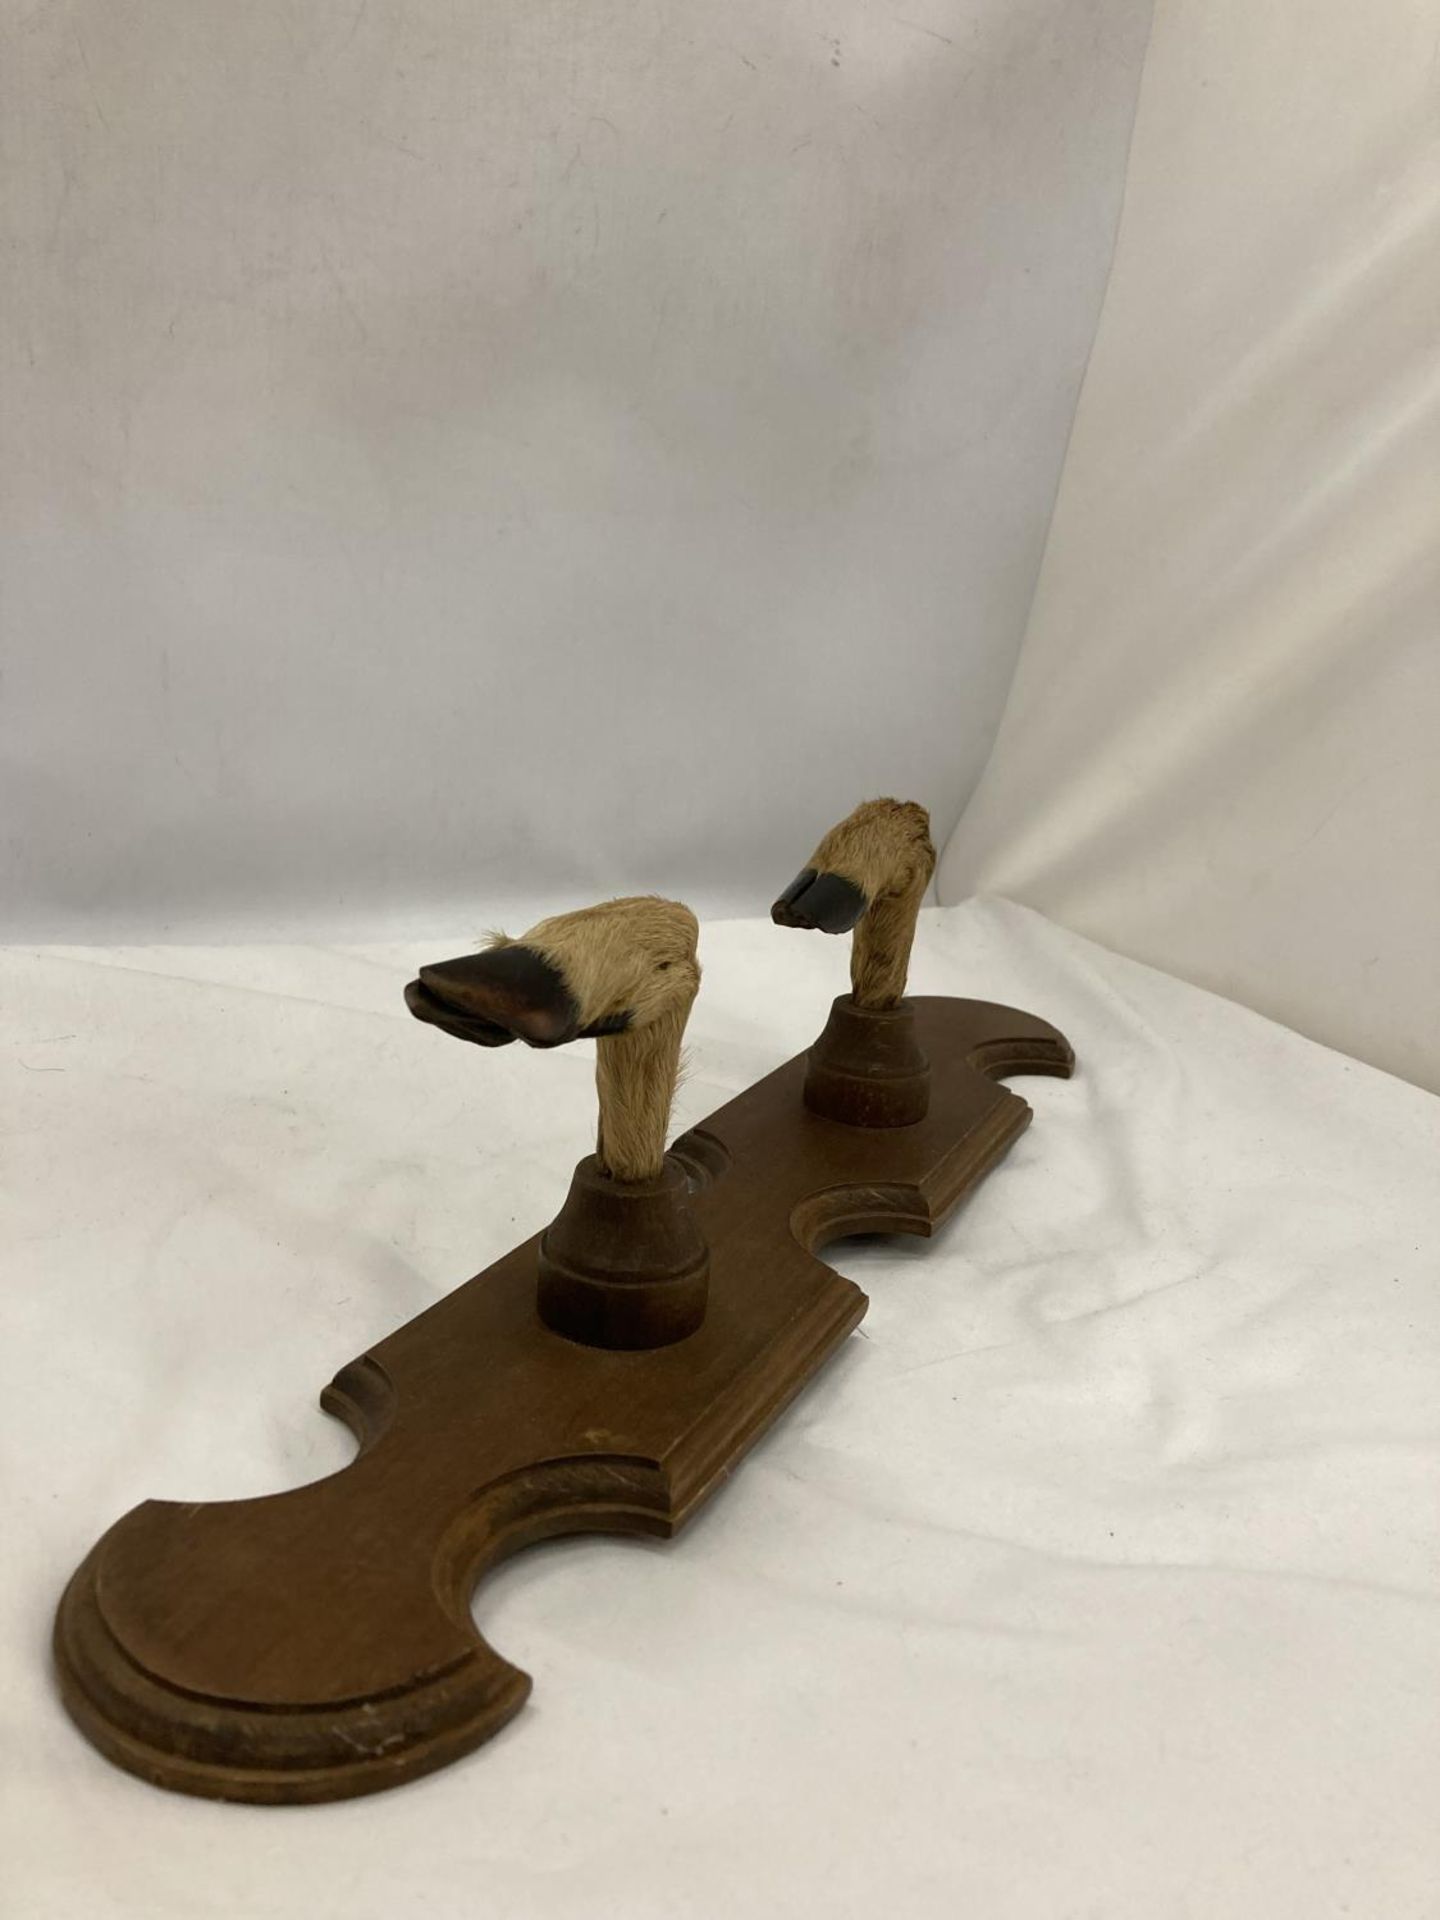 A WALL MOUNTED TWO HOOVED COAT RACK